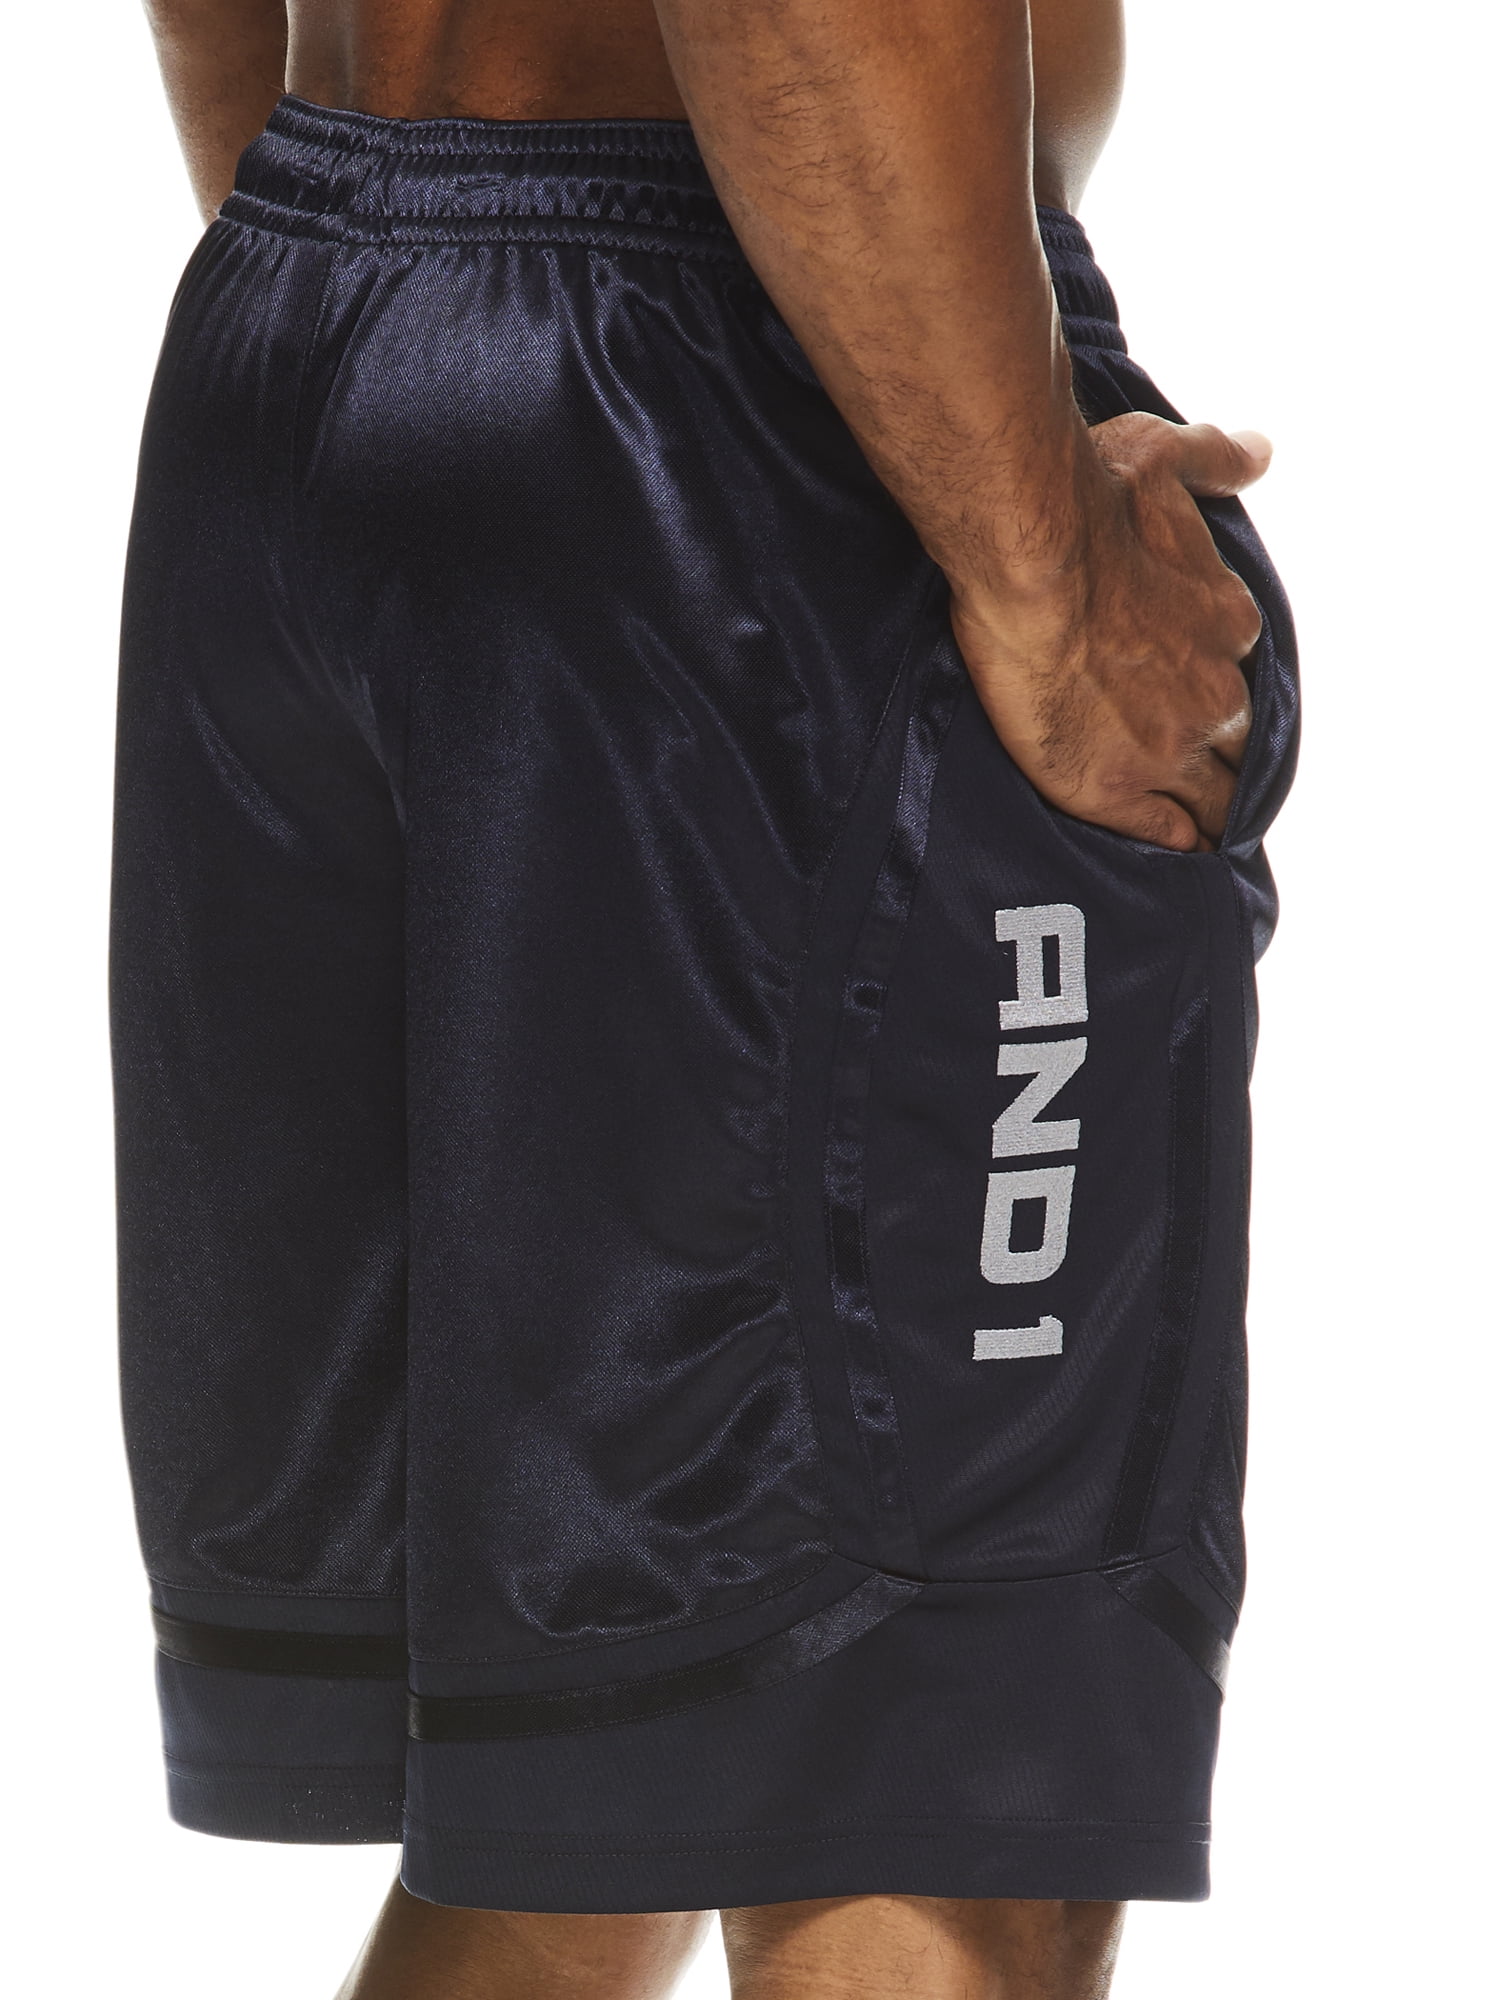 Details about   **** New Mens Basketball Shorts by And1.**Adjustable Elastic Waist Size 3XL.**** 